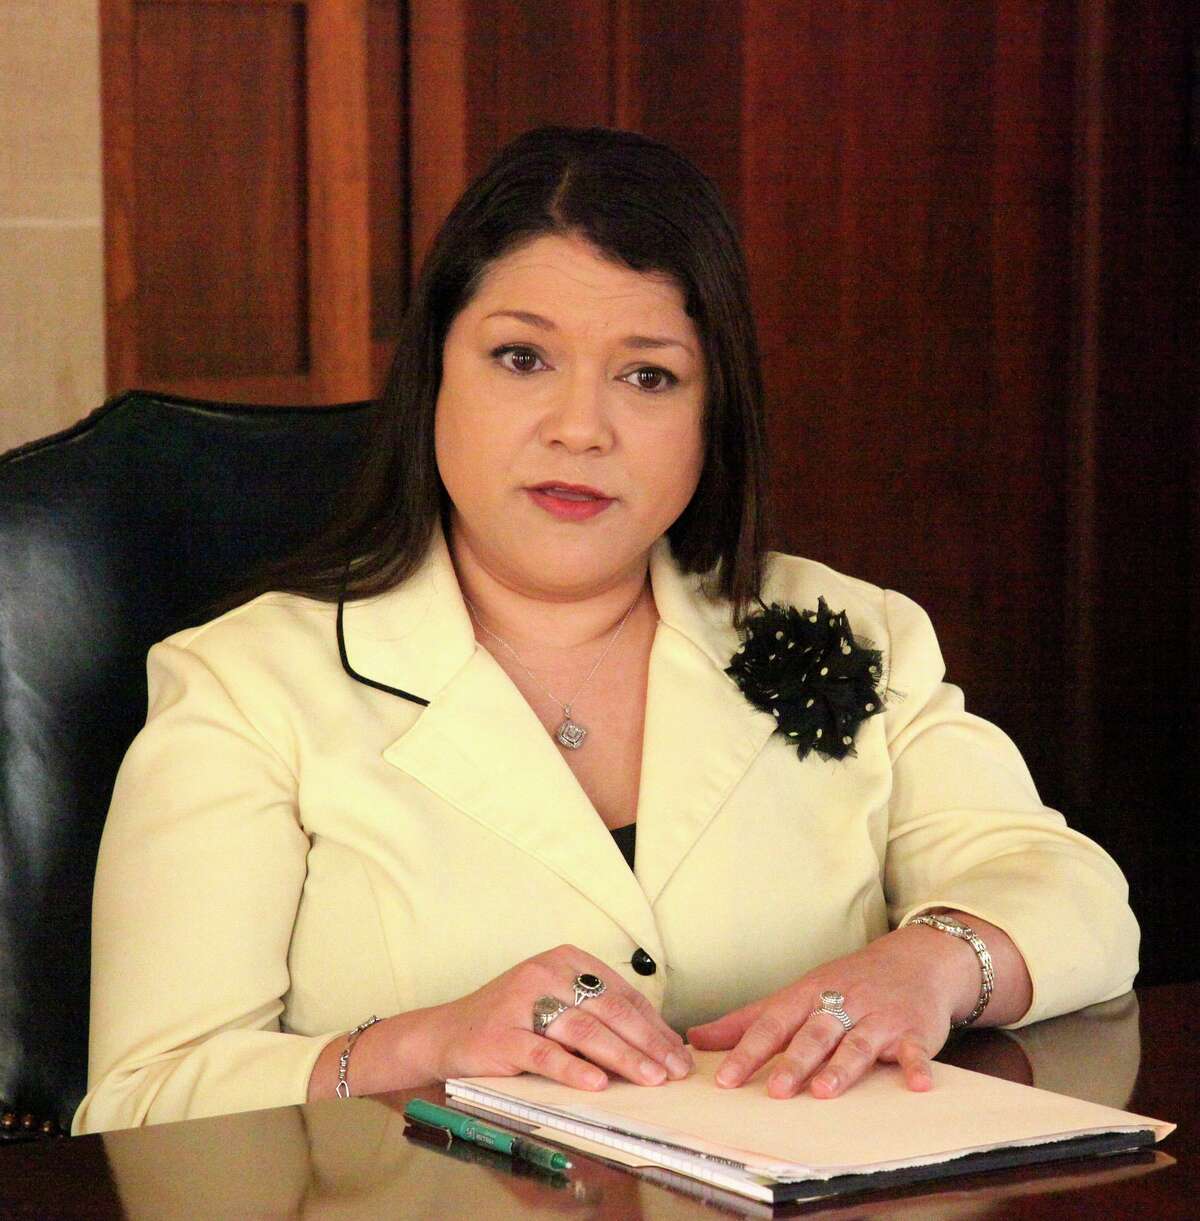 District 4 candidate Lorena “Lorraine” Pulido, 49, a public relations manager for VIA Metropolitan Transit, is shown in 2014.